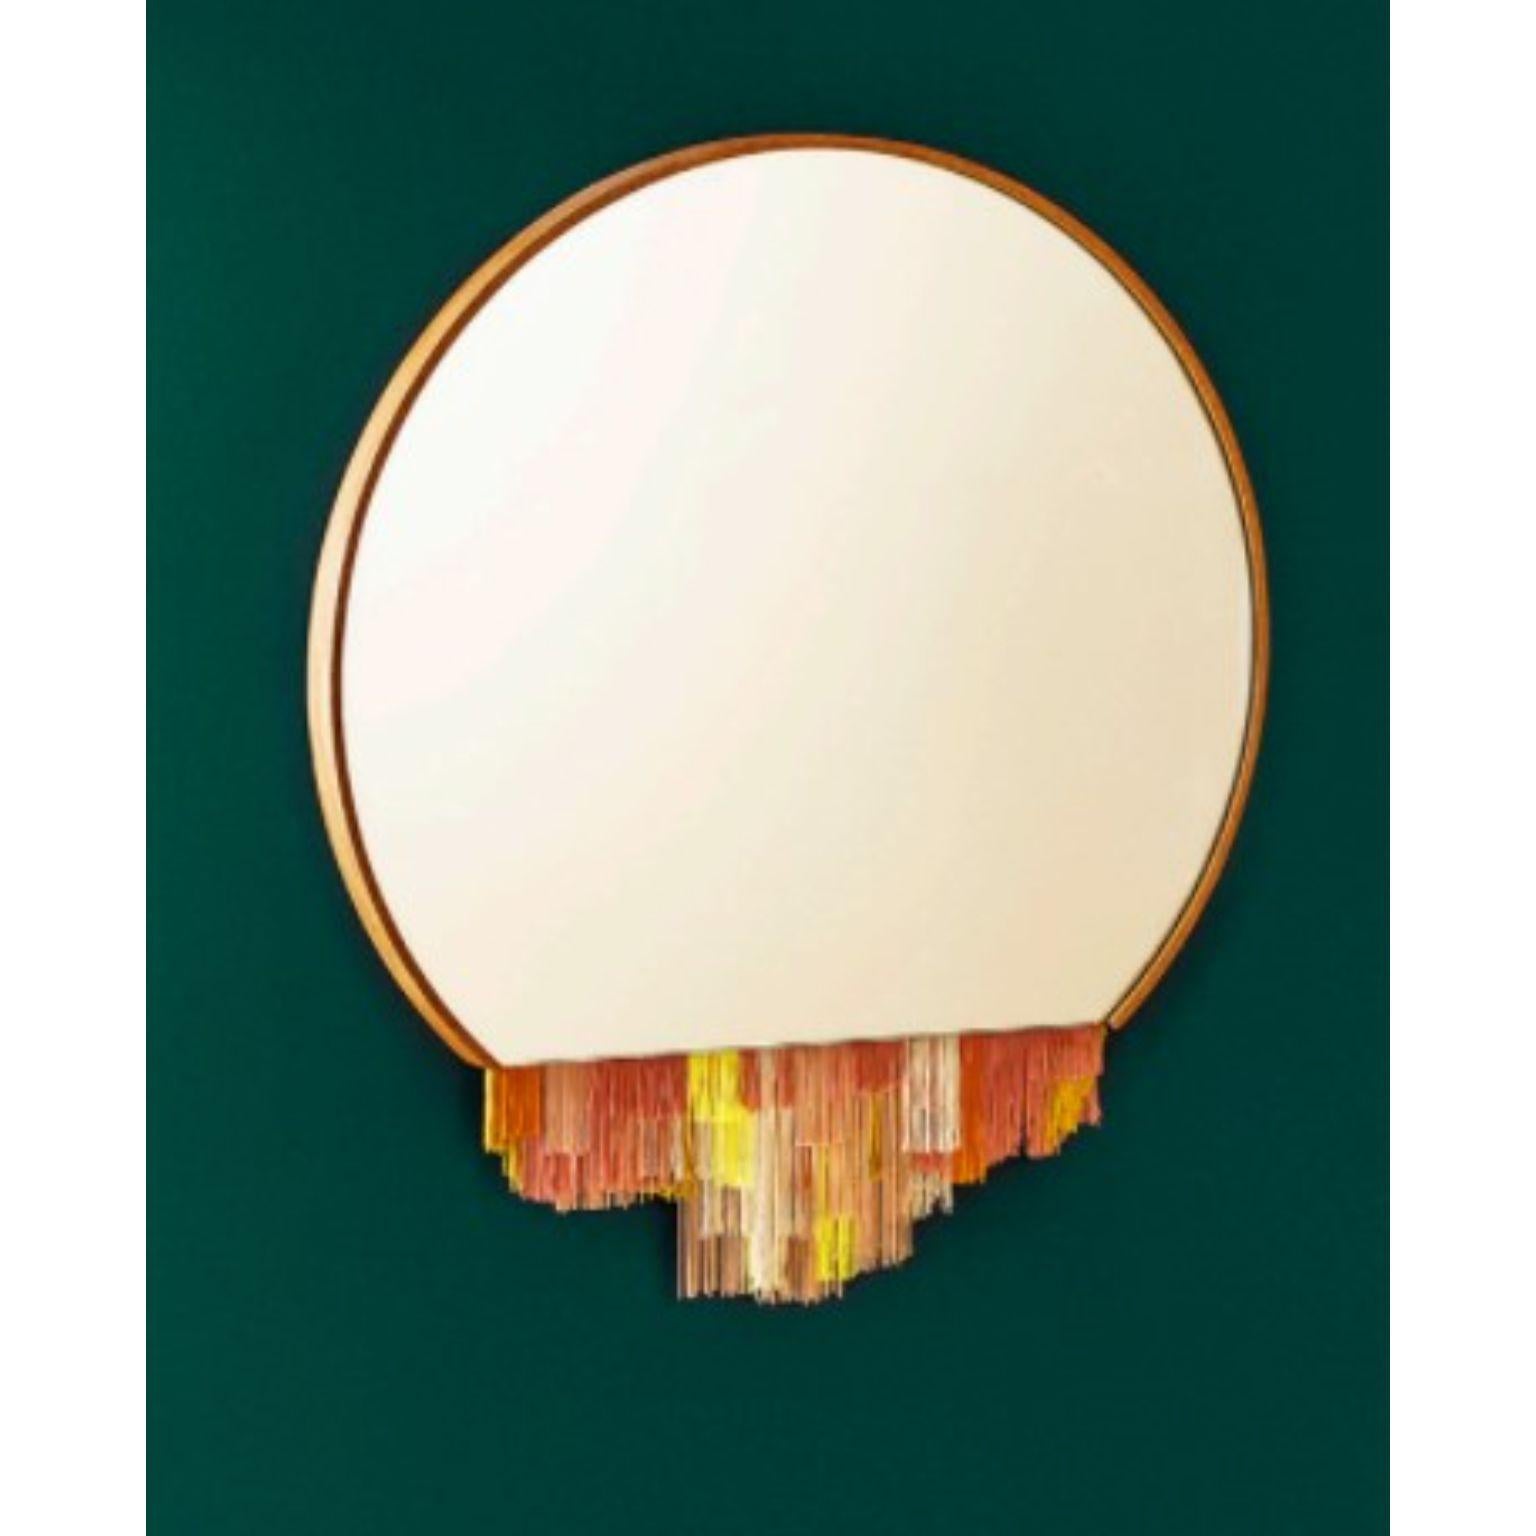 Fringe mirror orange by Tero Kuitunen
Material: oak, glass mirror, textile fringes.
Dimensions: D53 x W53 x H3 cm
Also available : different colors.

Do you remember the old fabric lamp shades with fringe edges? I love how they evoke the urge